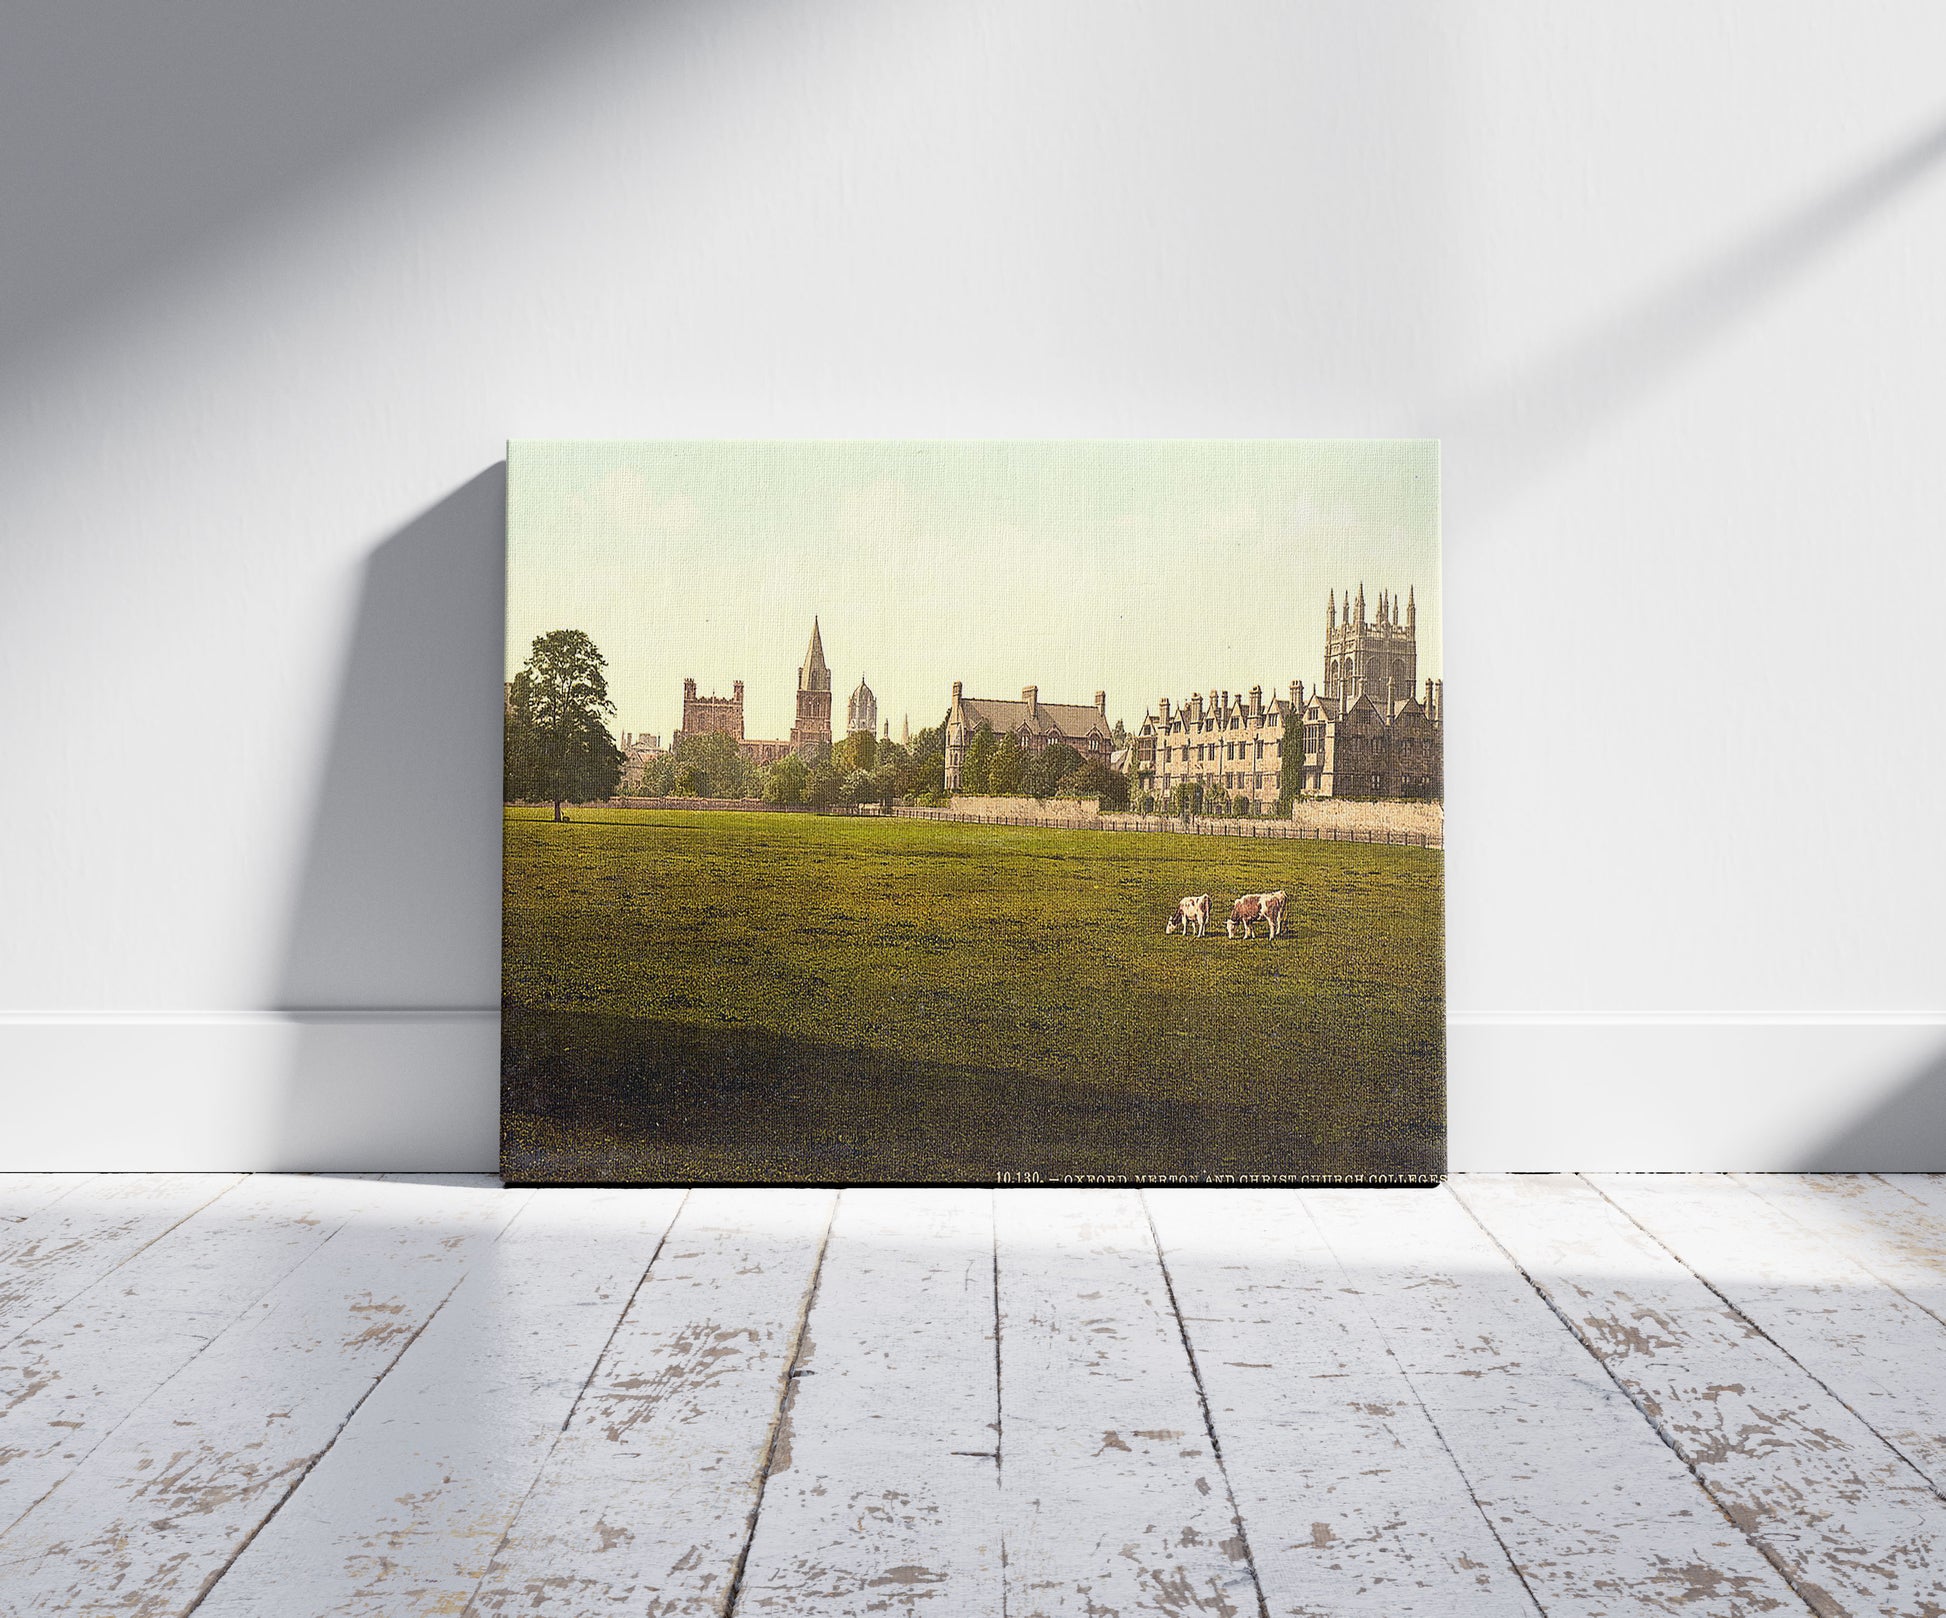 A picture of Merton and Christ Church College, Oxford, England